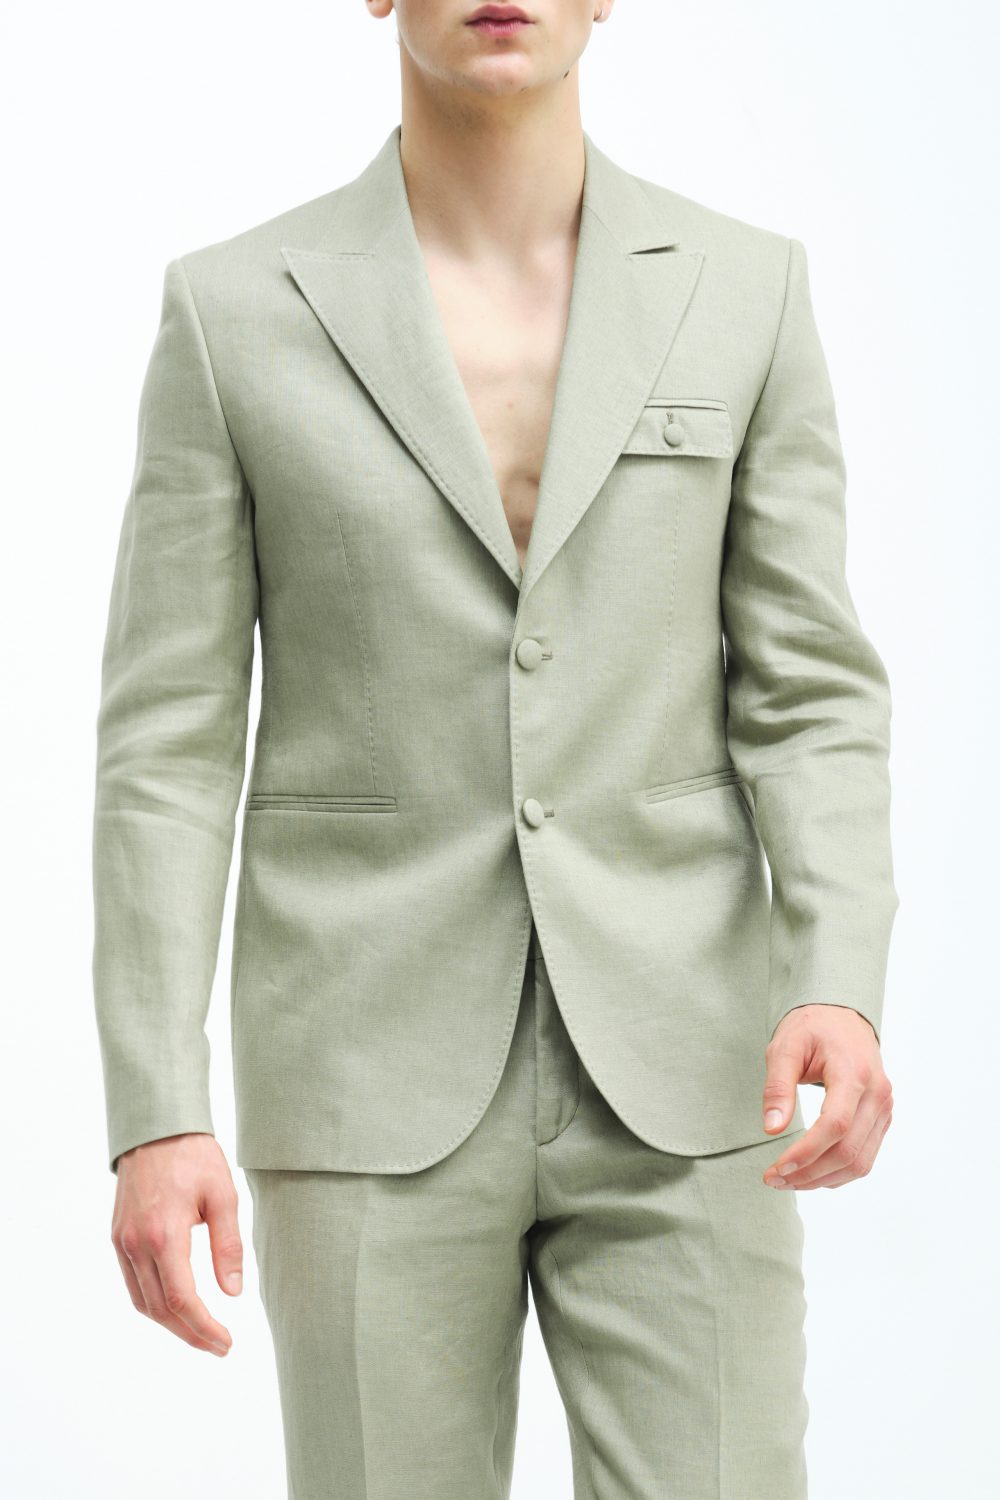 SUITS TULIP GRAY GREEN